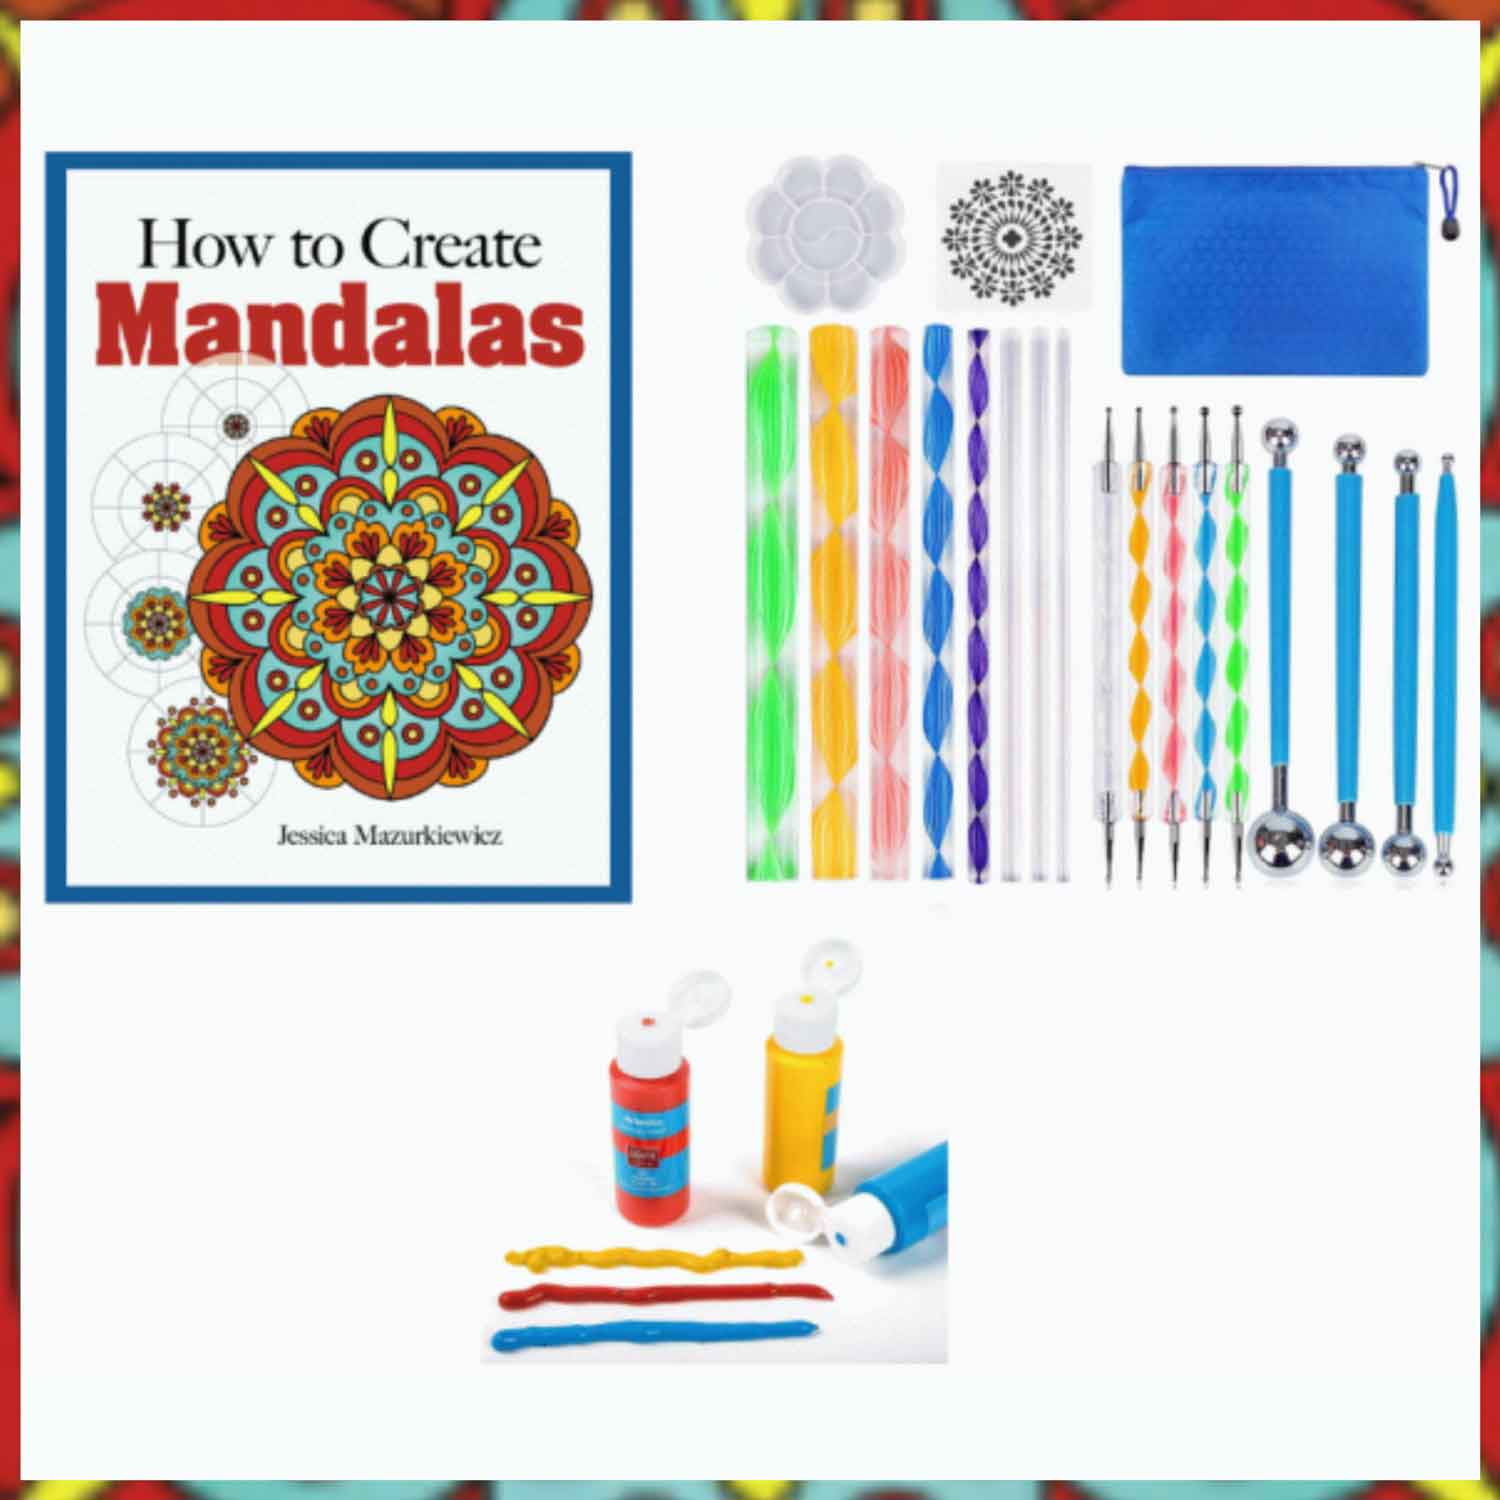 The link to this Library of Things Mandala Do It Yourself Kit catalog item will open in an external site and in a new tab or window.